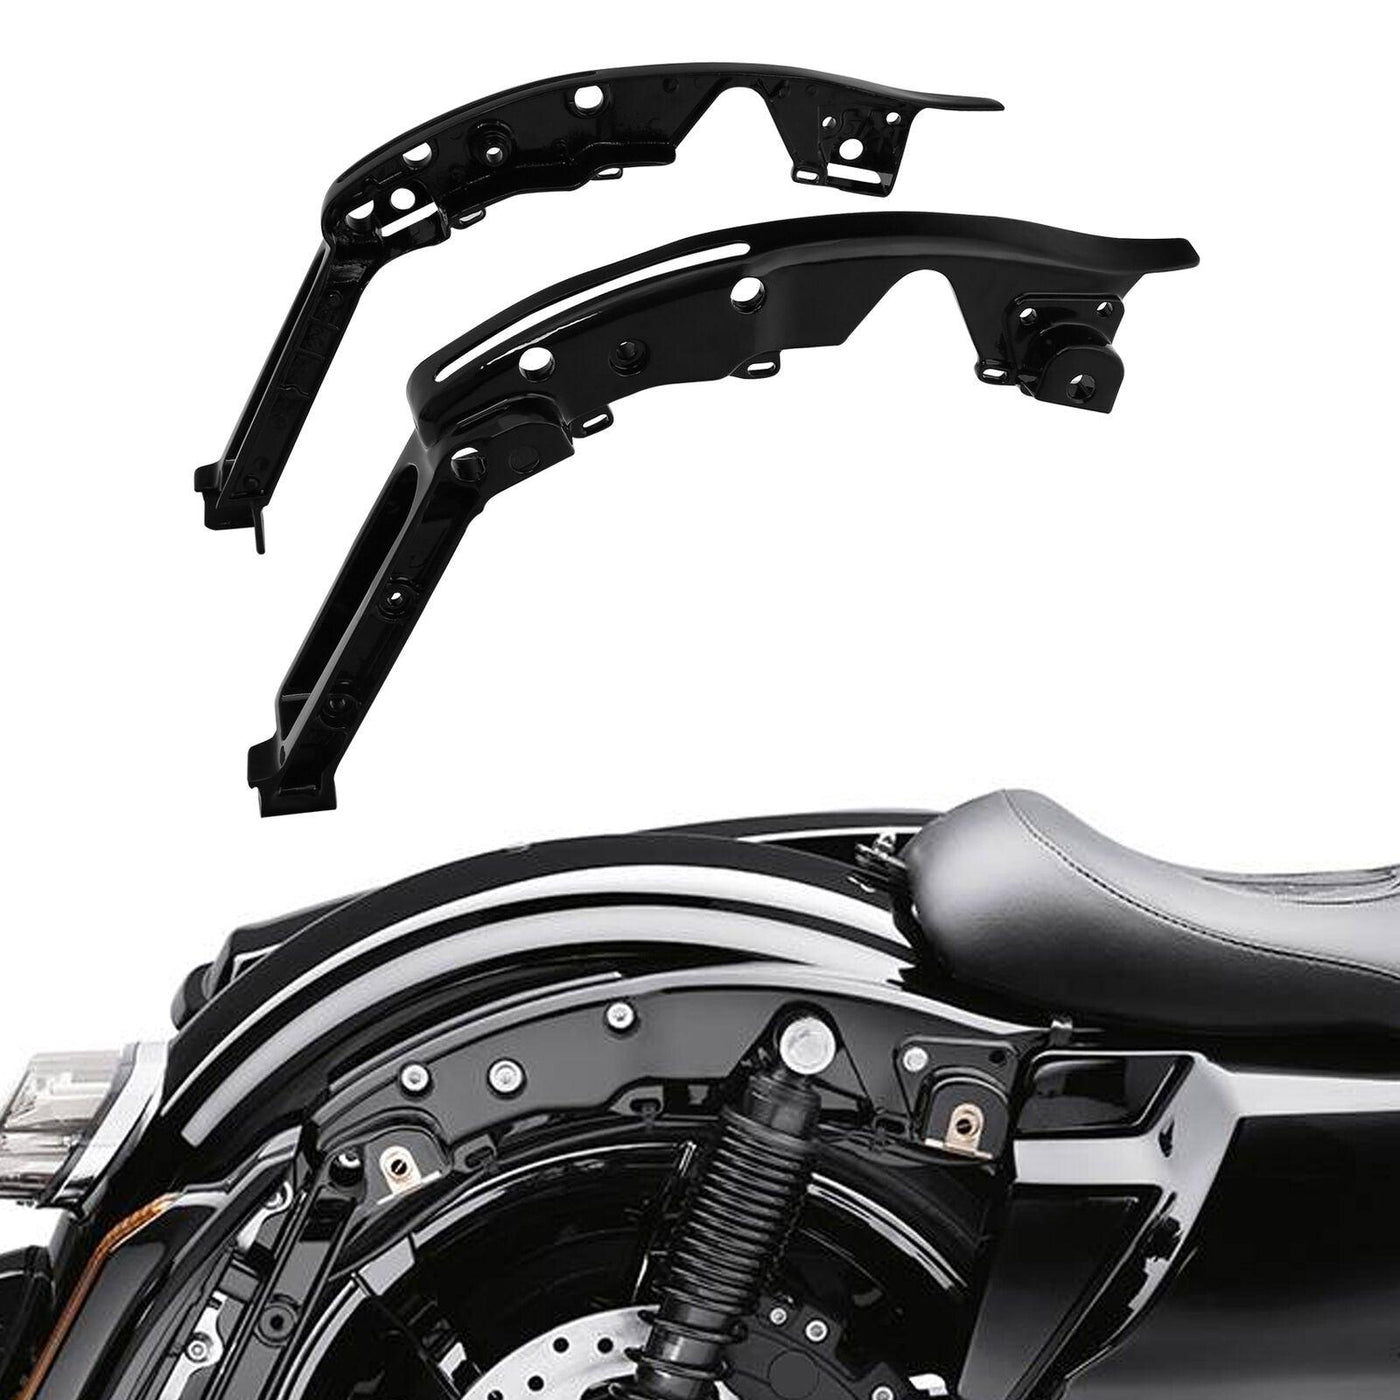 Gloss Black Fender Support Kit Fit For Harley Touring CVO Street Glide 2014-2022 - Moto Life Products